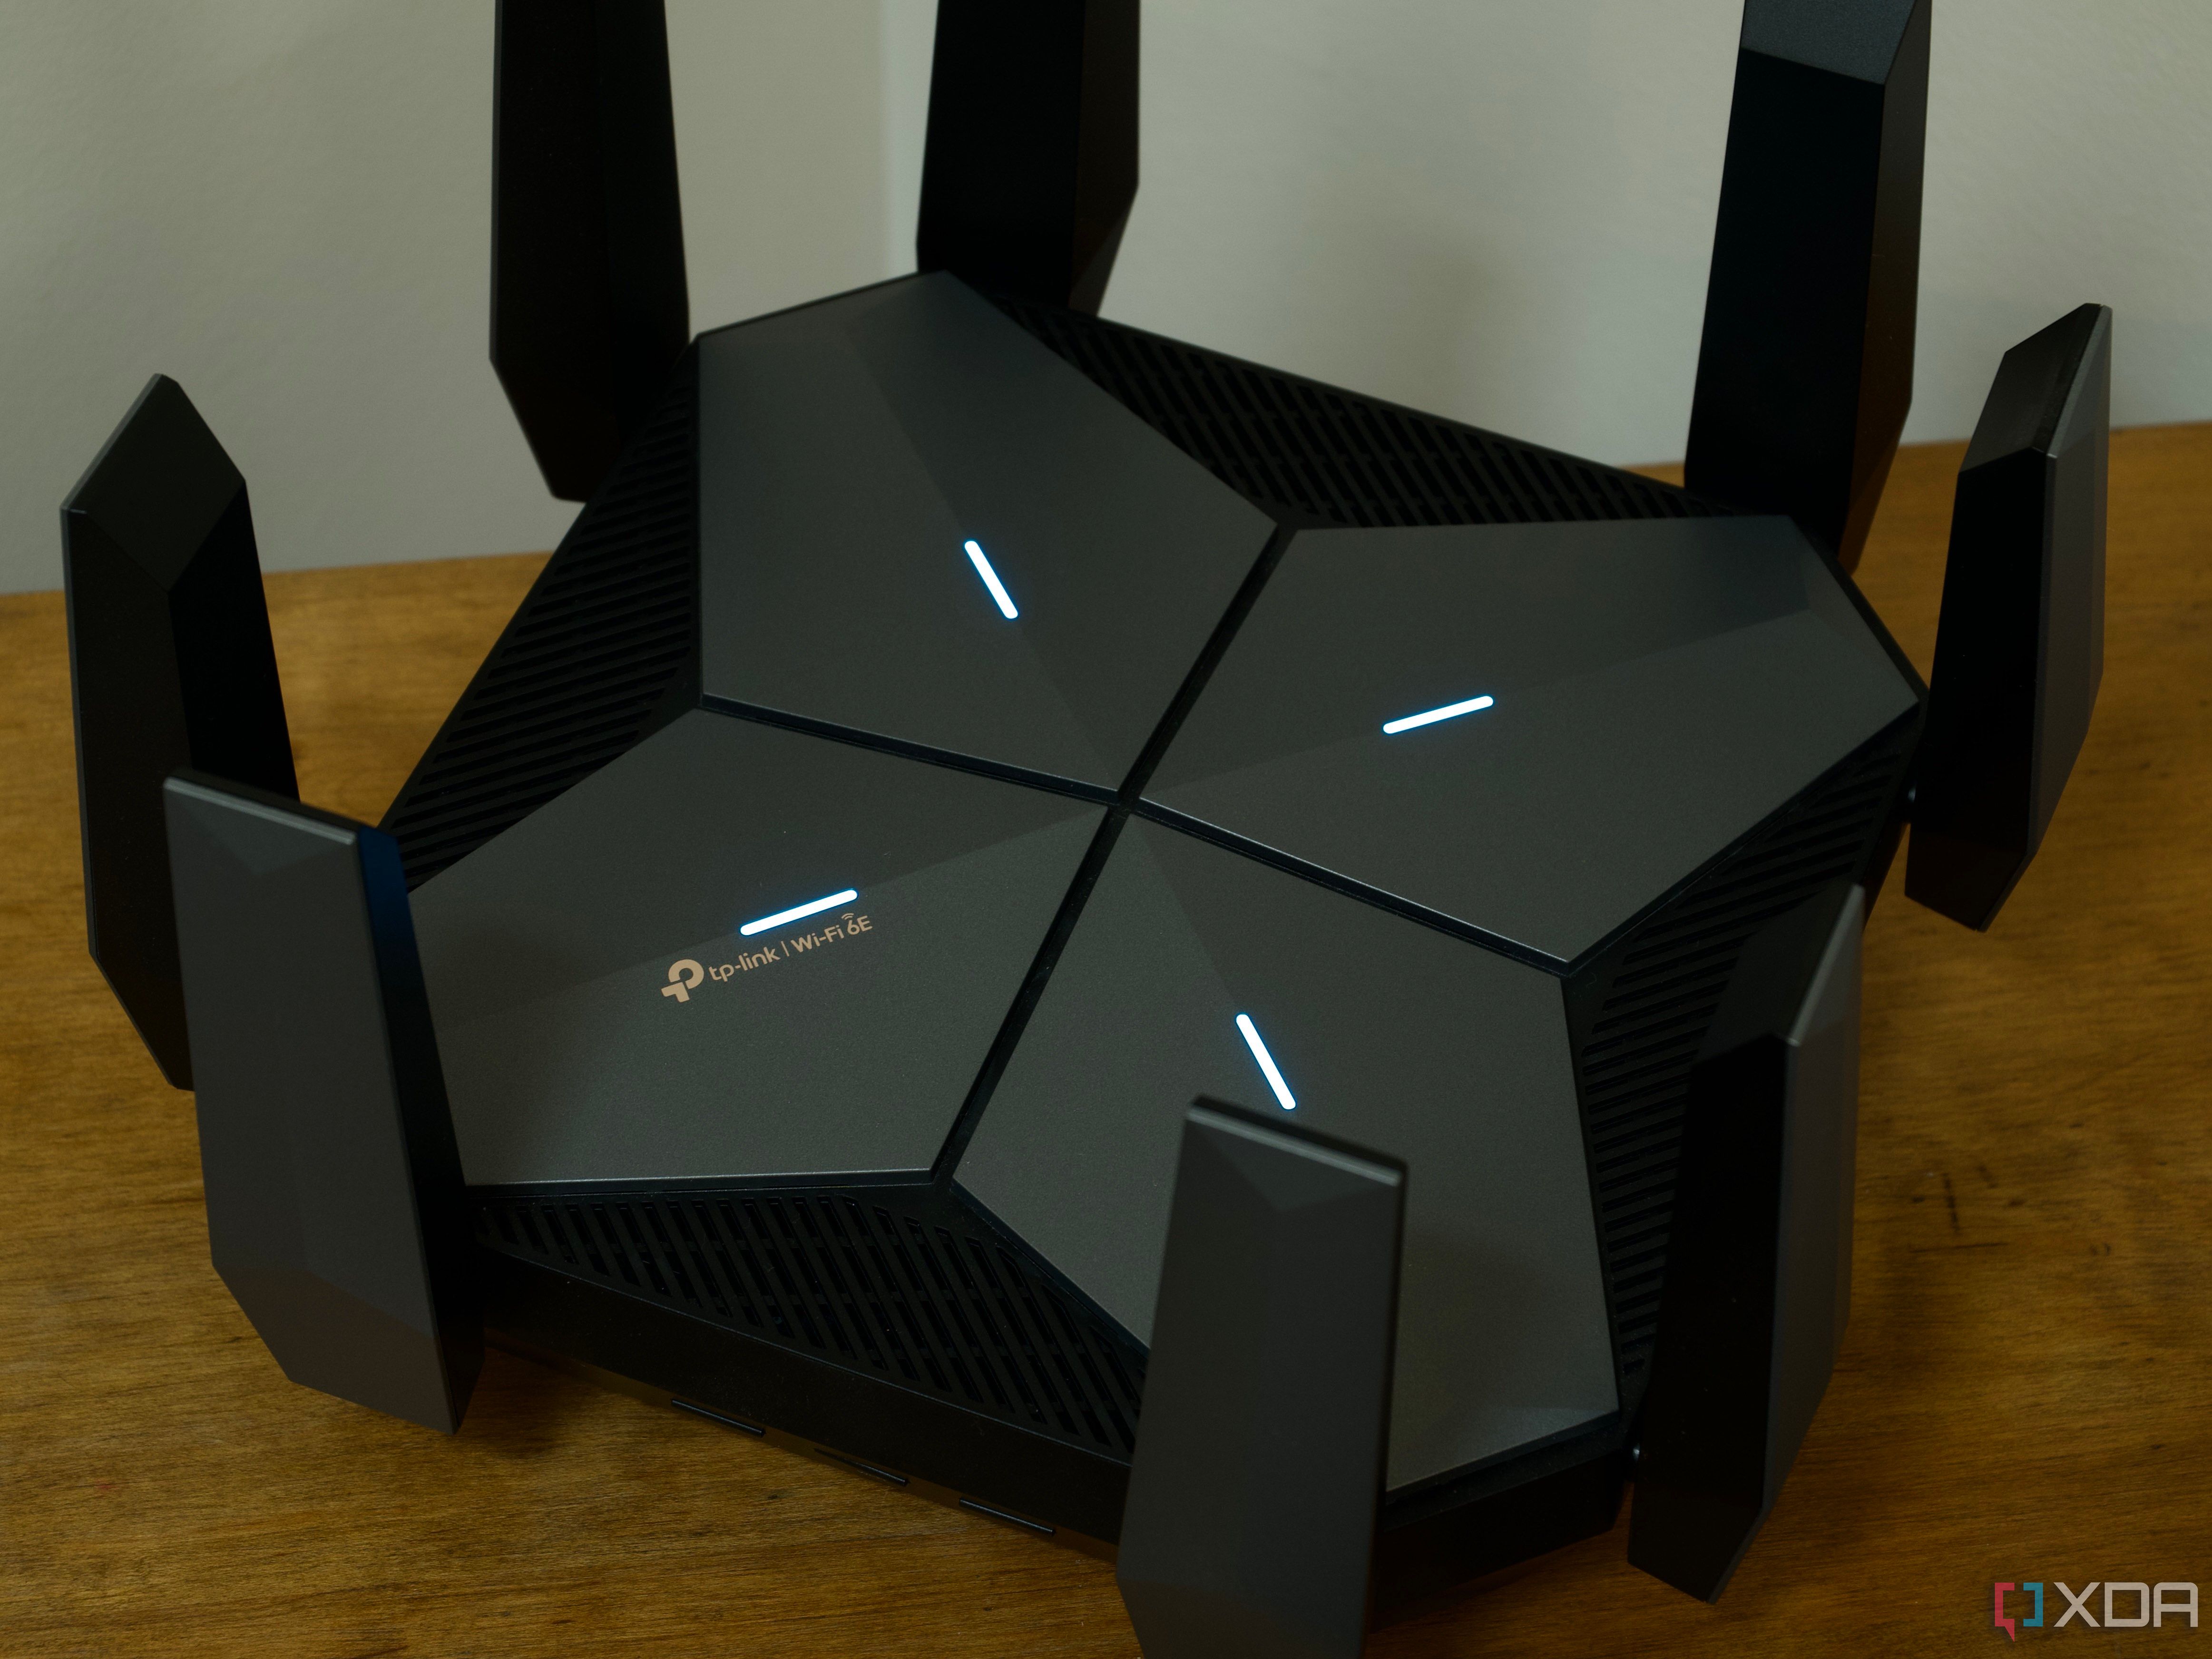 Best TP-Link routers in 2024